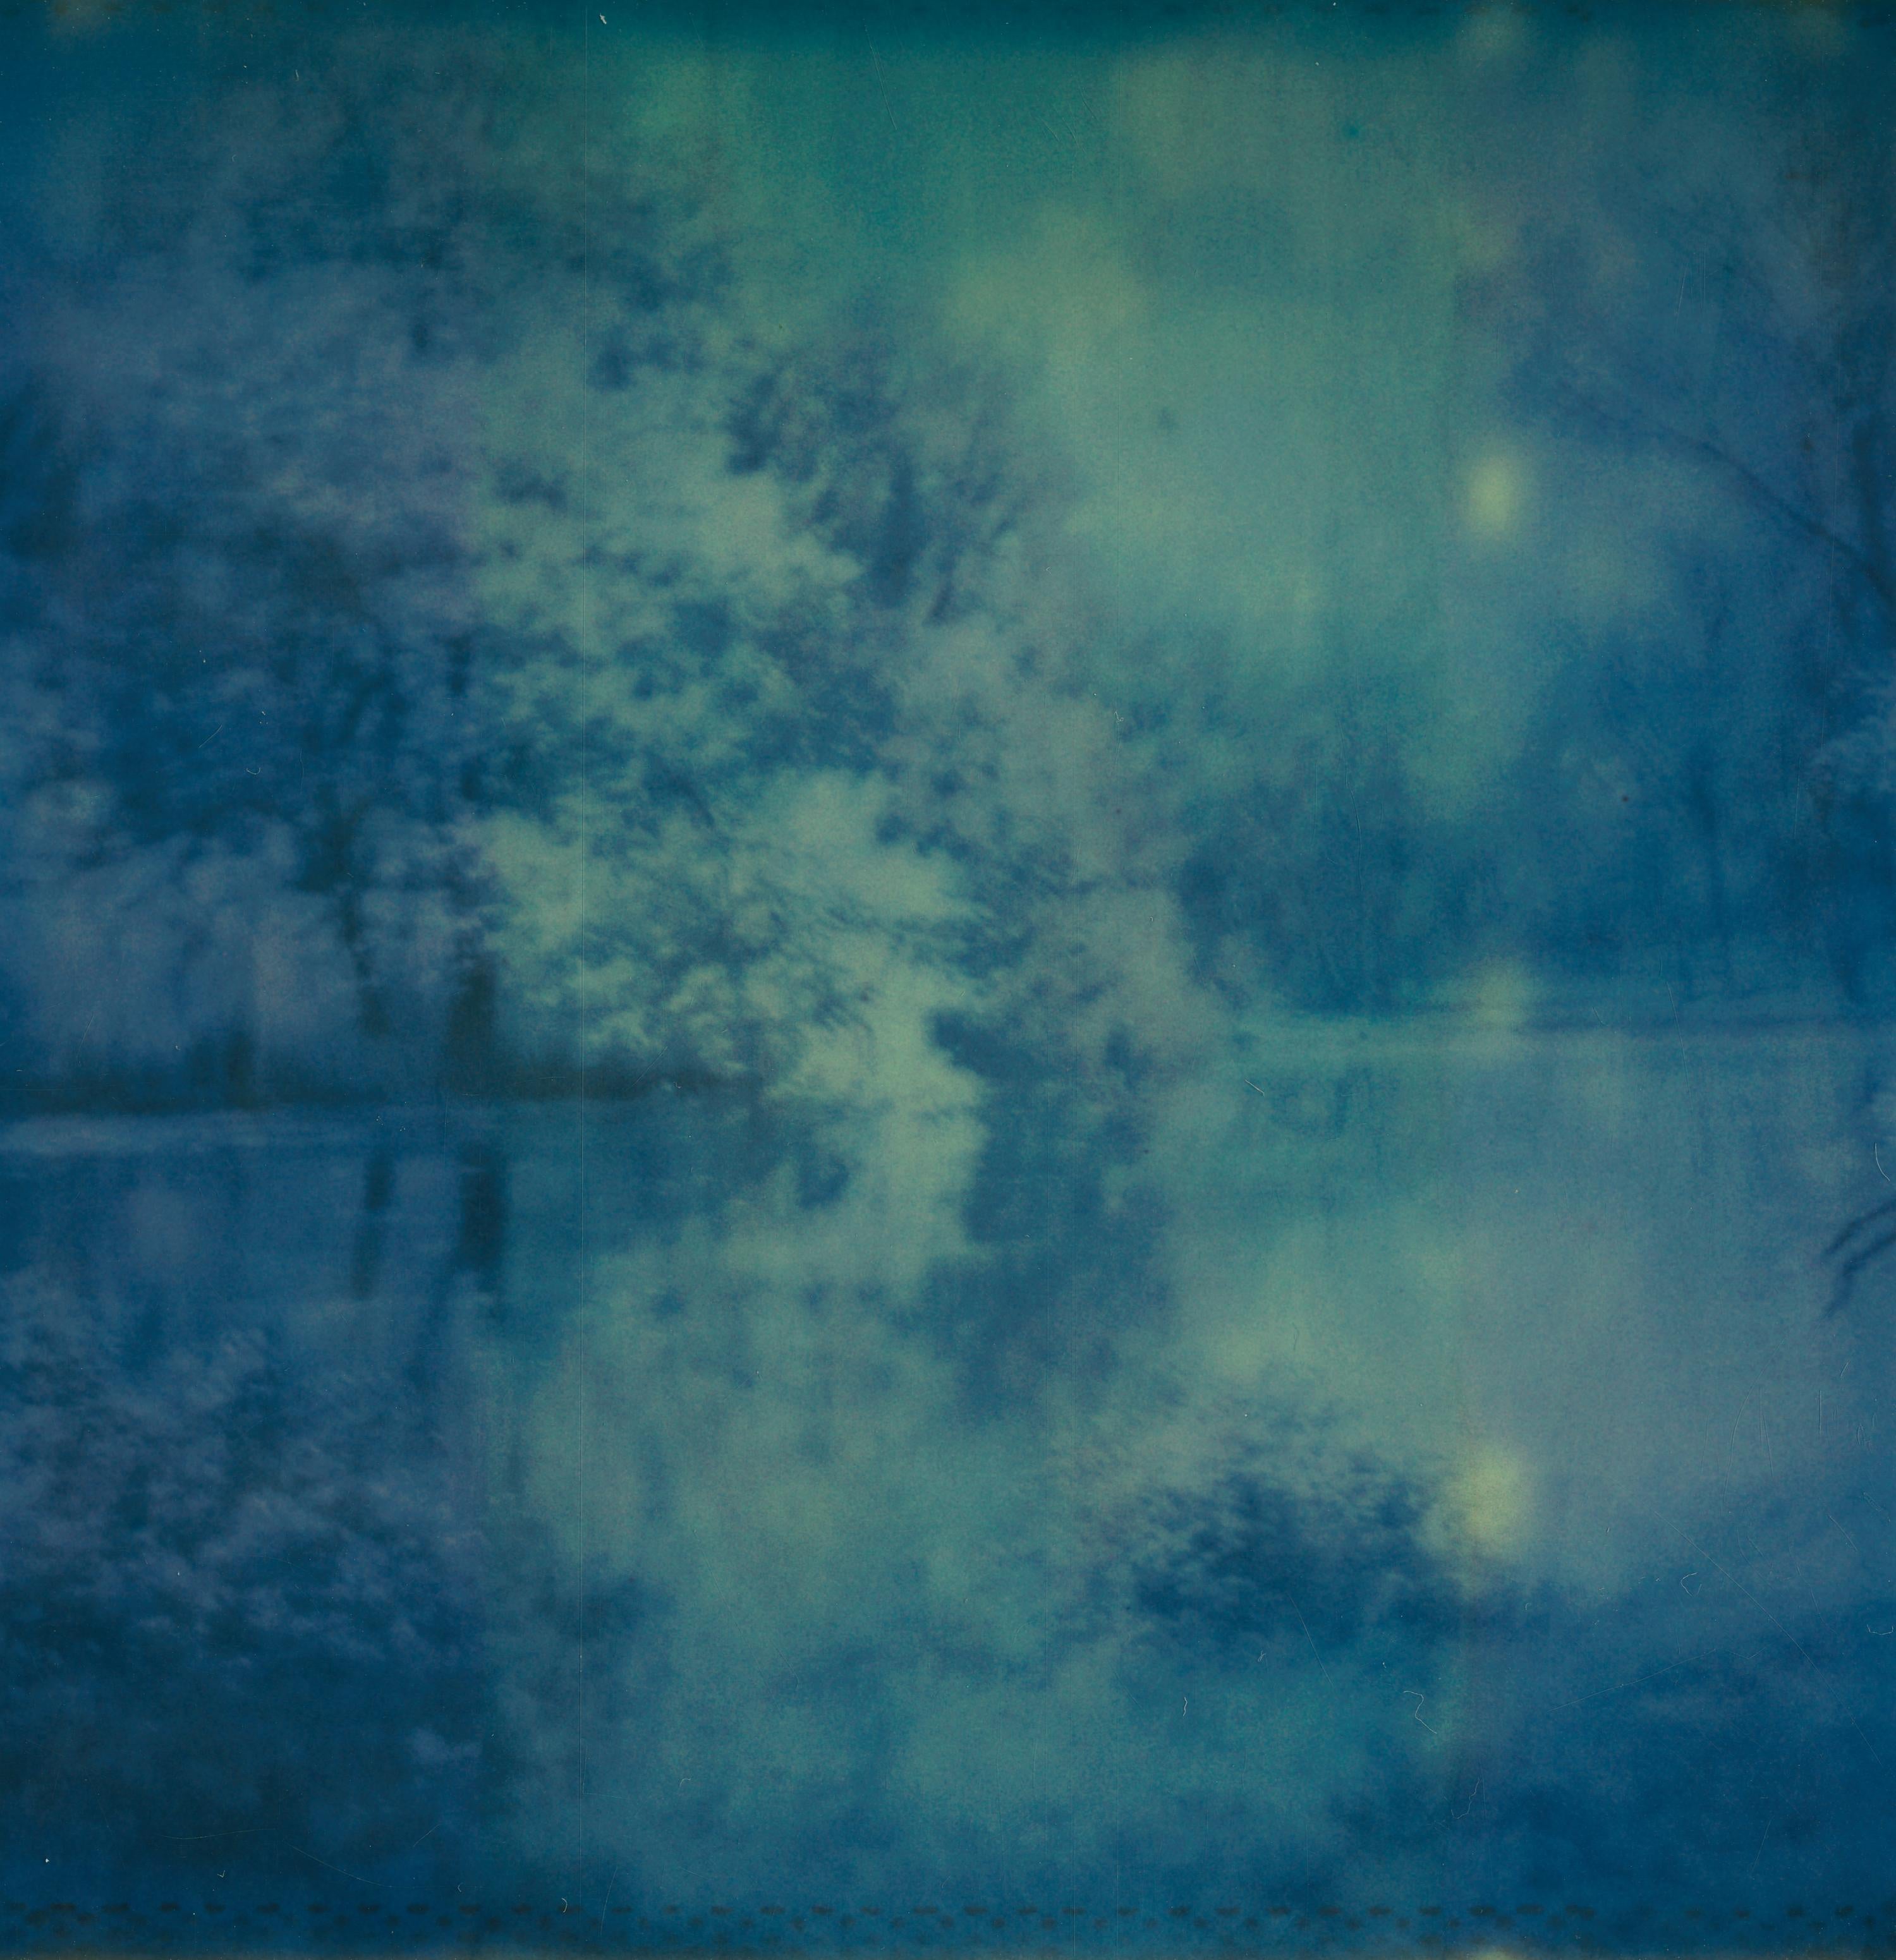 Lost in Blue I (Till Death do us Part) Contemporary, Woman, Polaroid